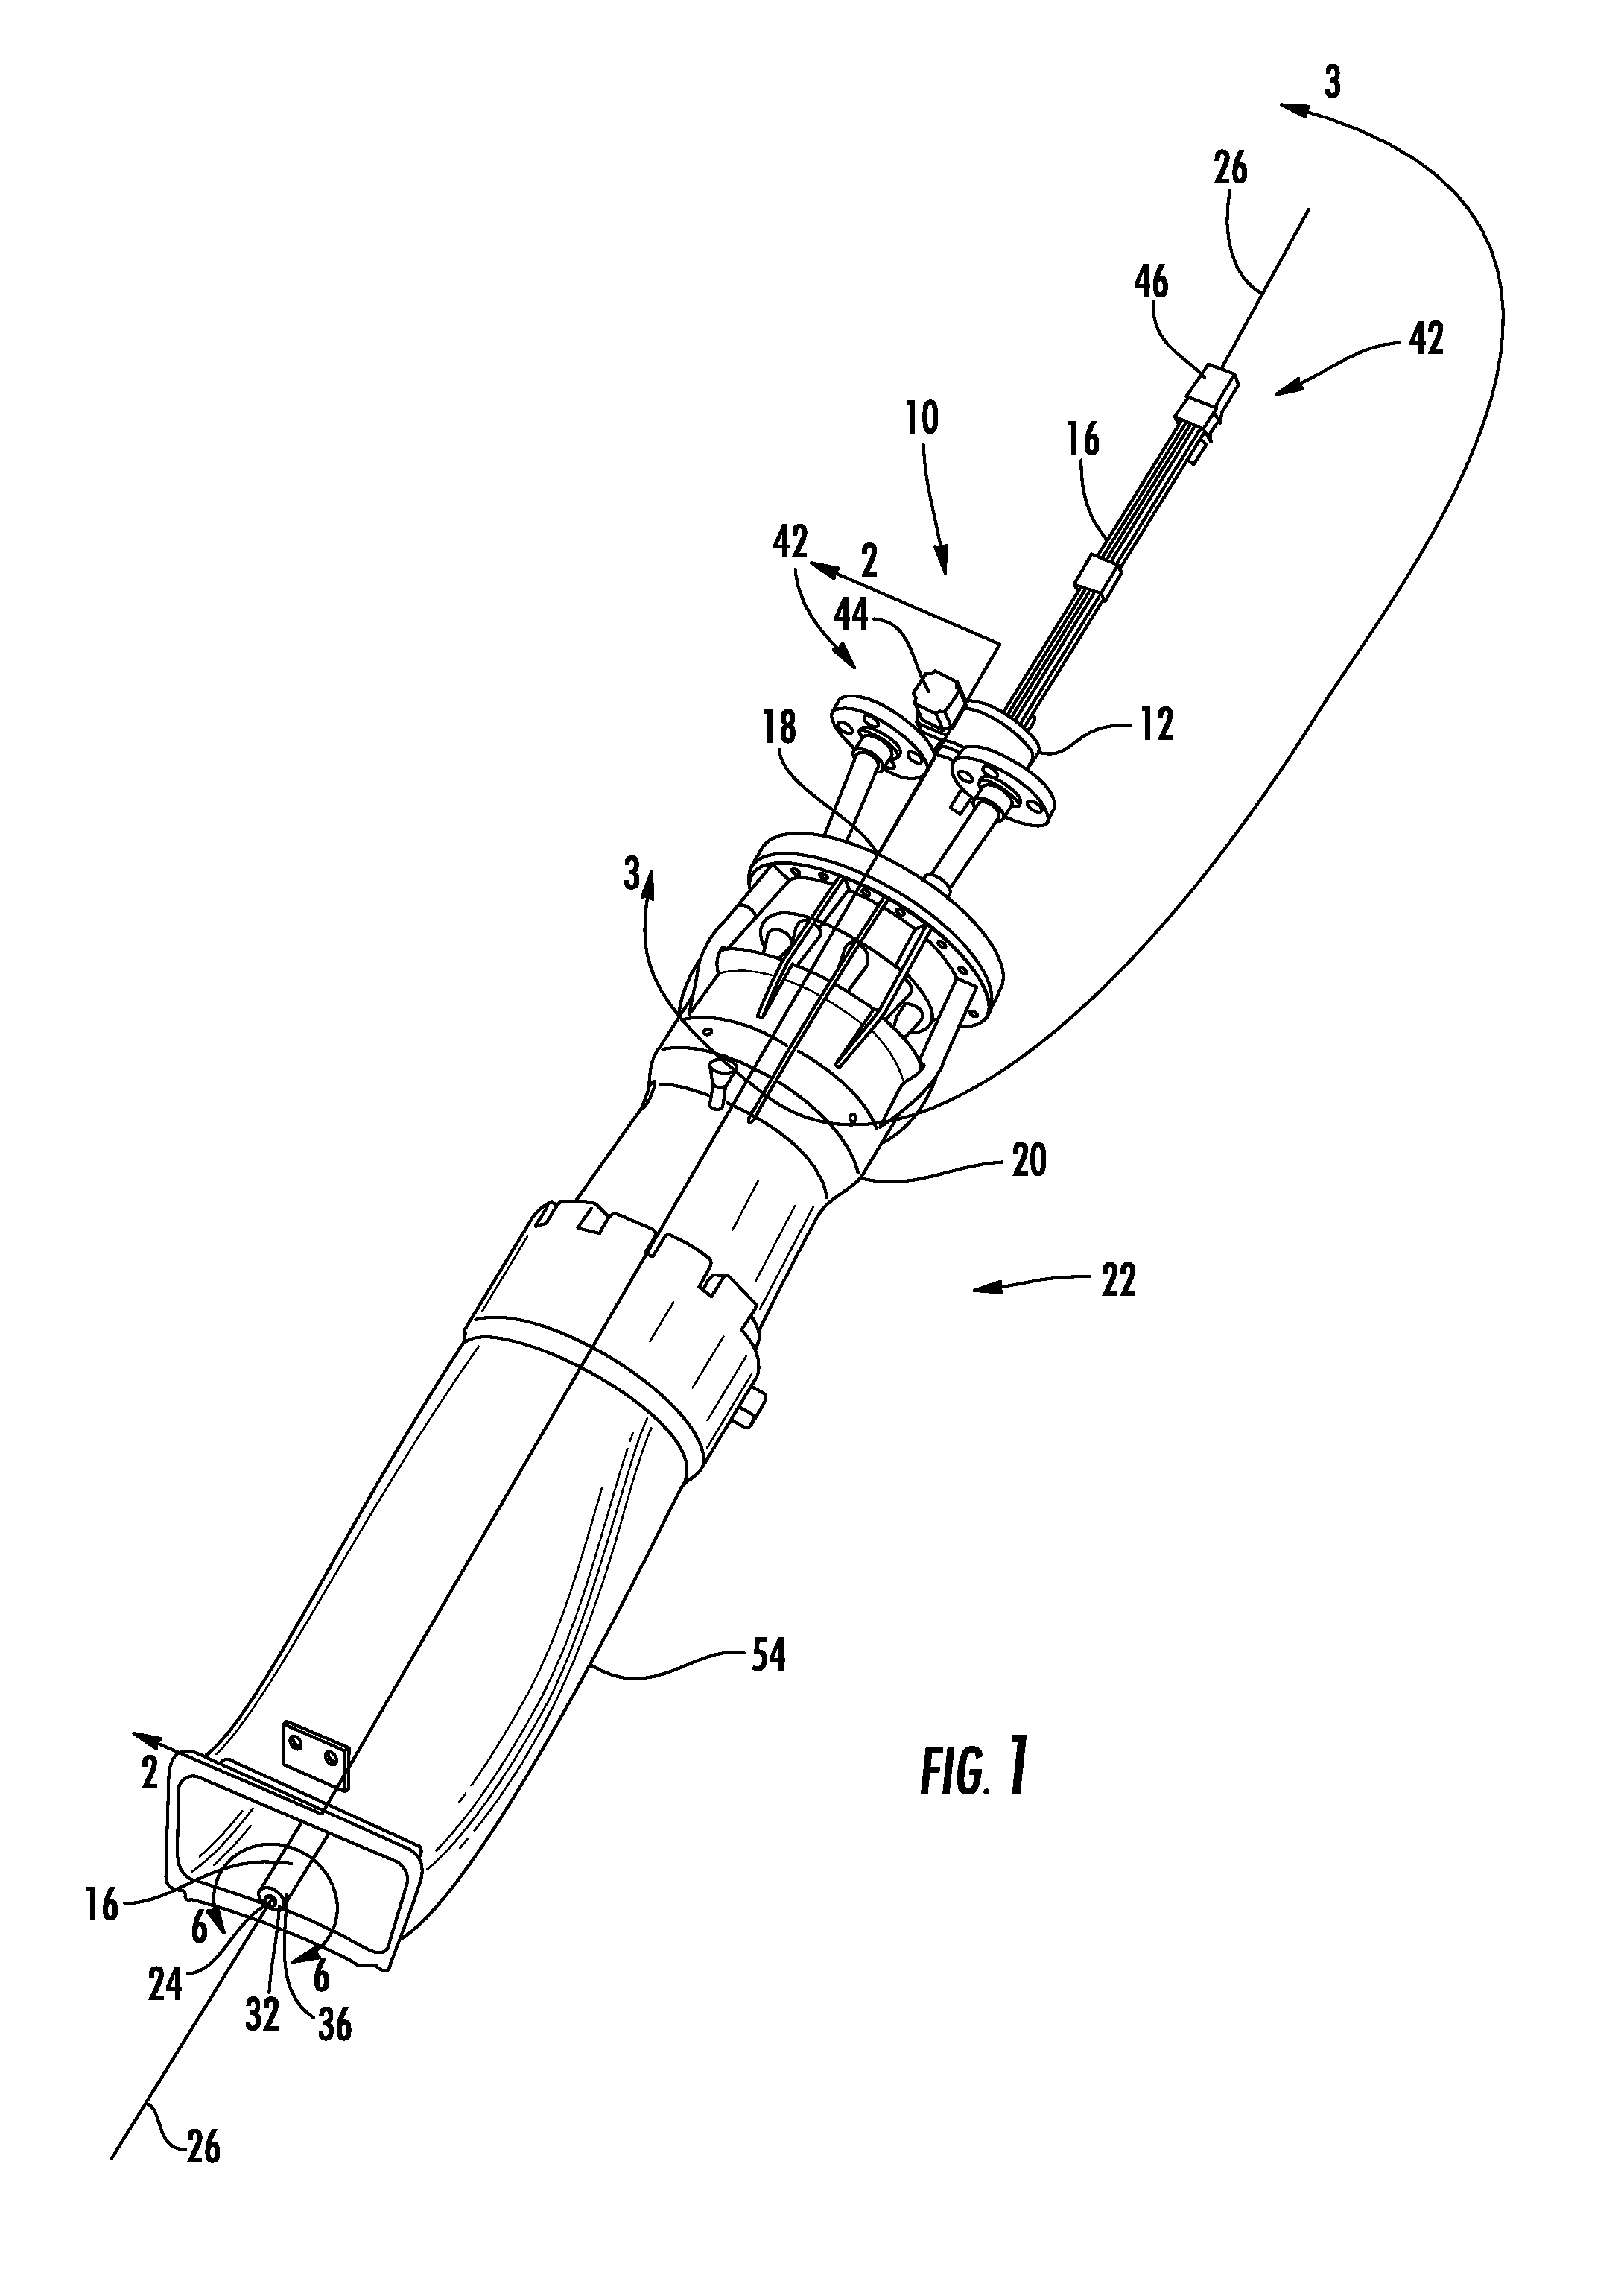 Inspection system for a combustor of a turbine engine